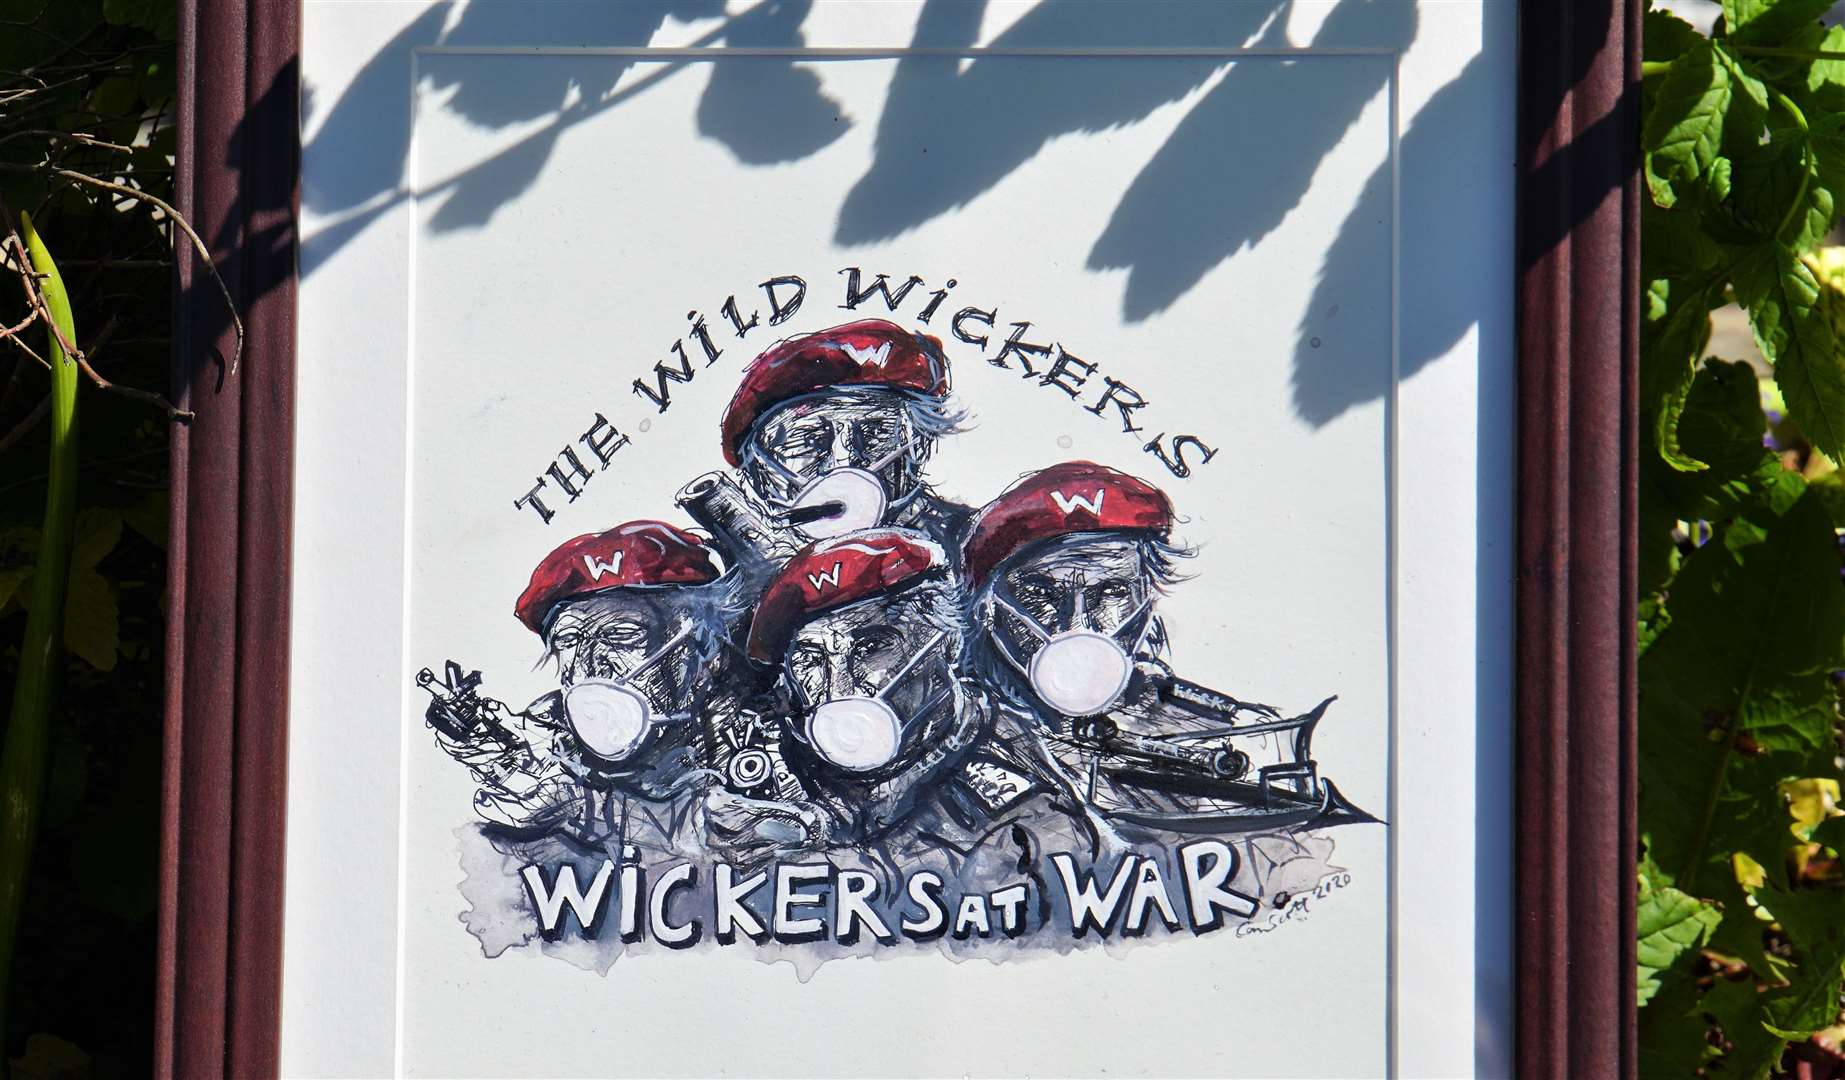 The Ian Scott drawing Wickers at War is a satirical take on the action film from 1978 called The Wild Geese. Picture: DGS